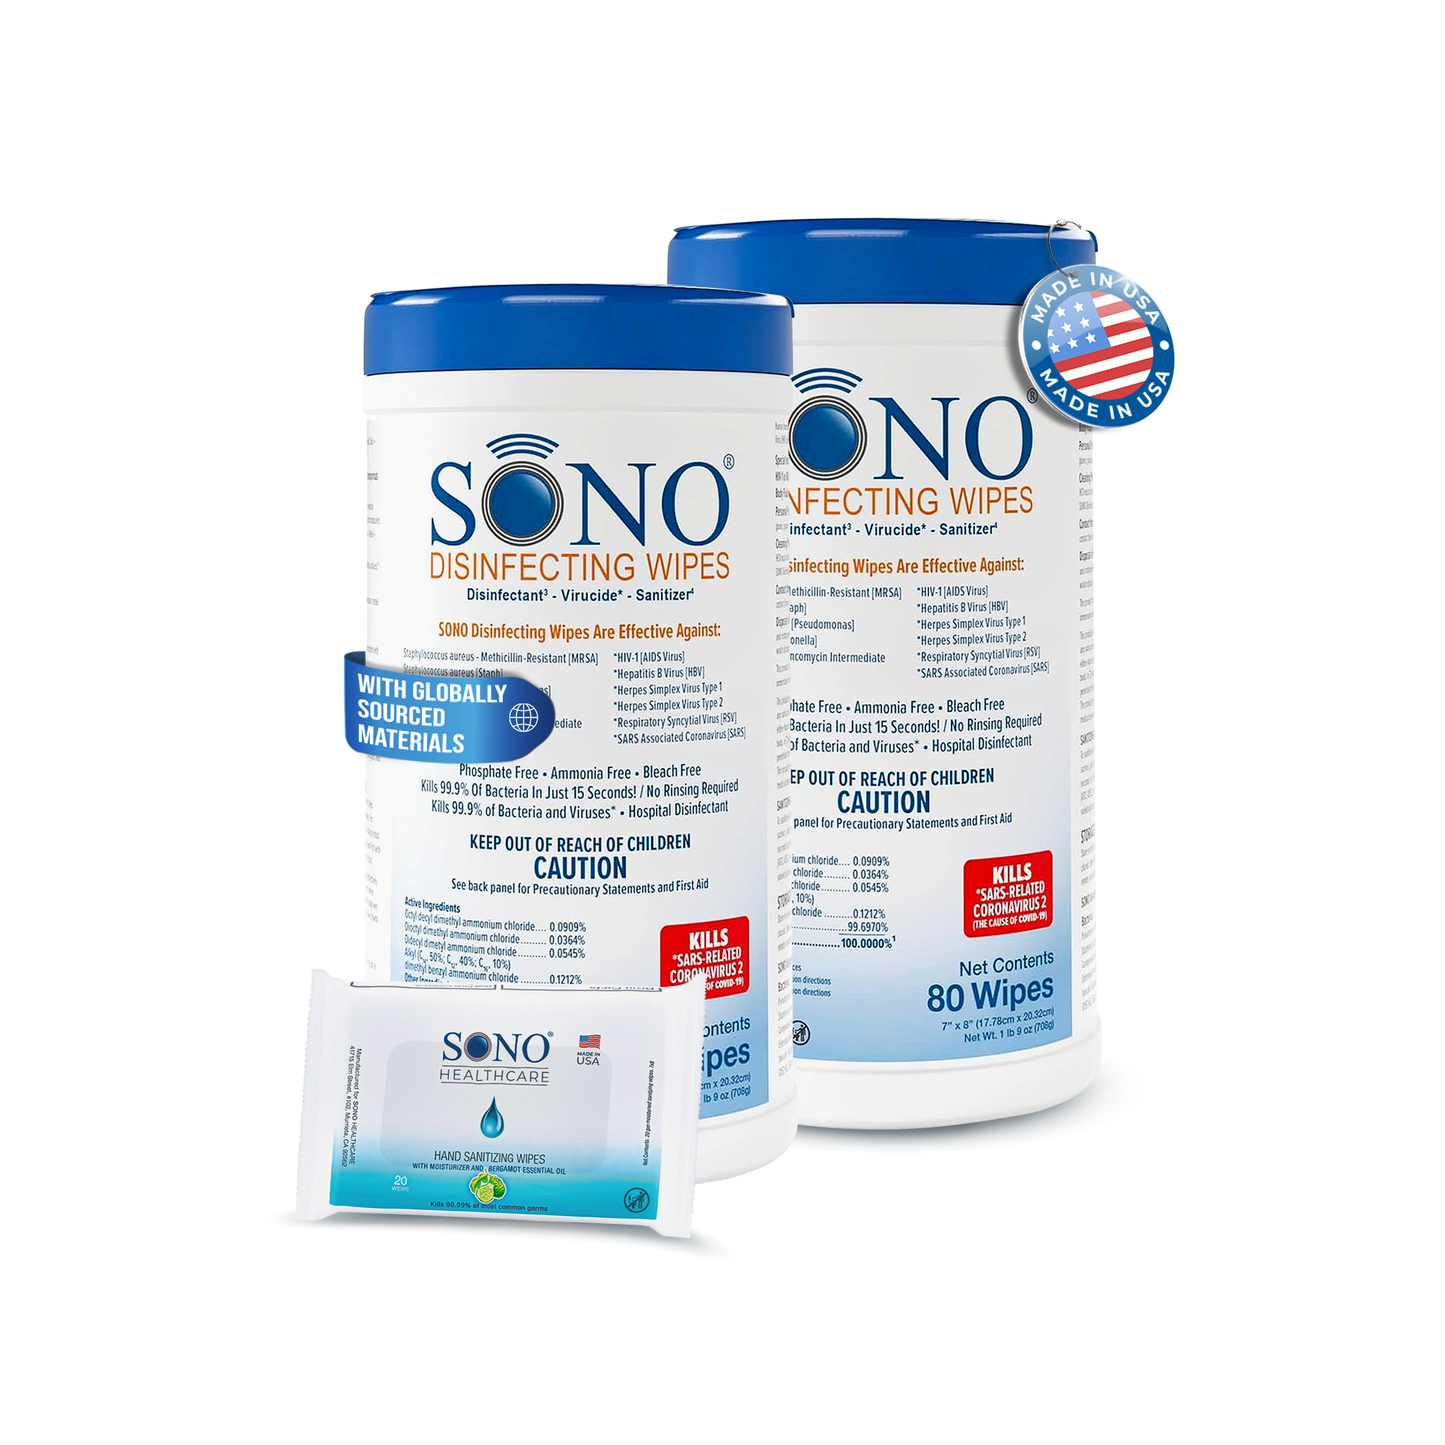 Disinfecting & Hand Sanitizing Wipes Bundle | Family Pack - SONO Wipes